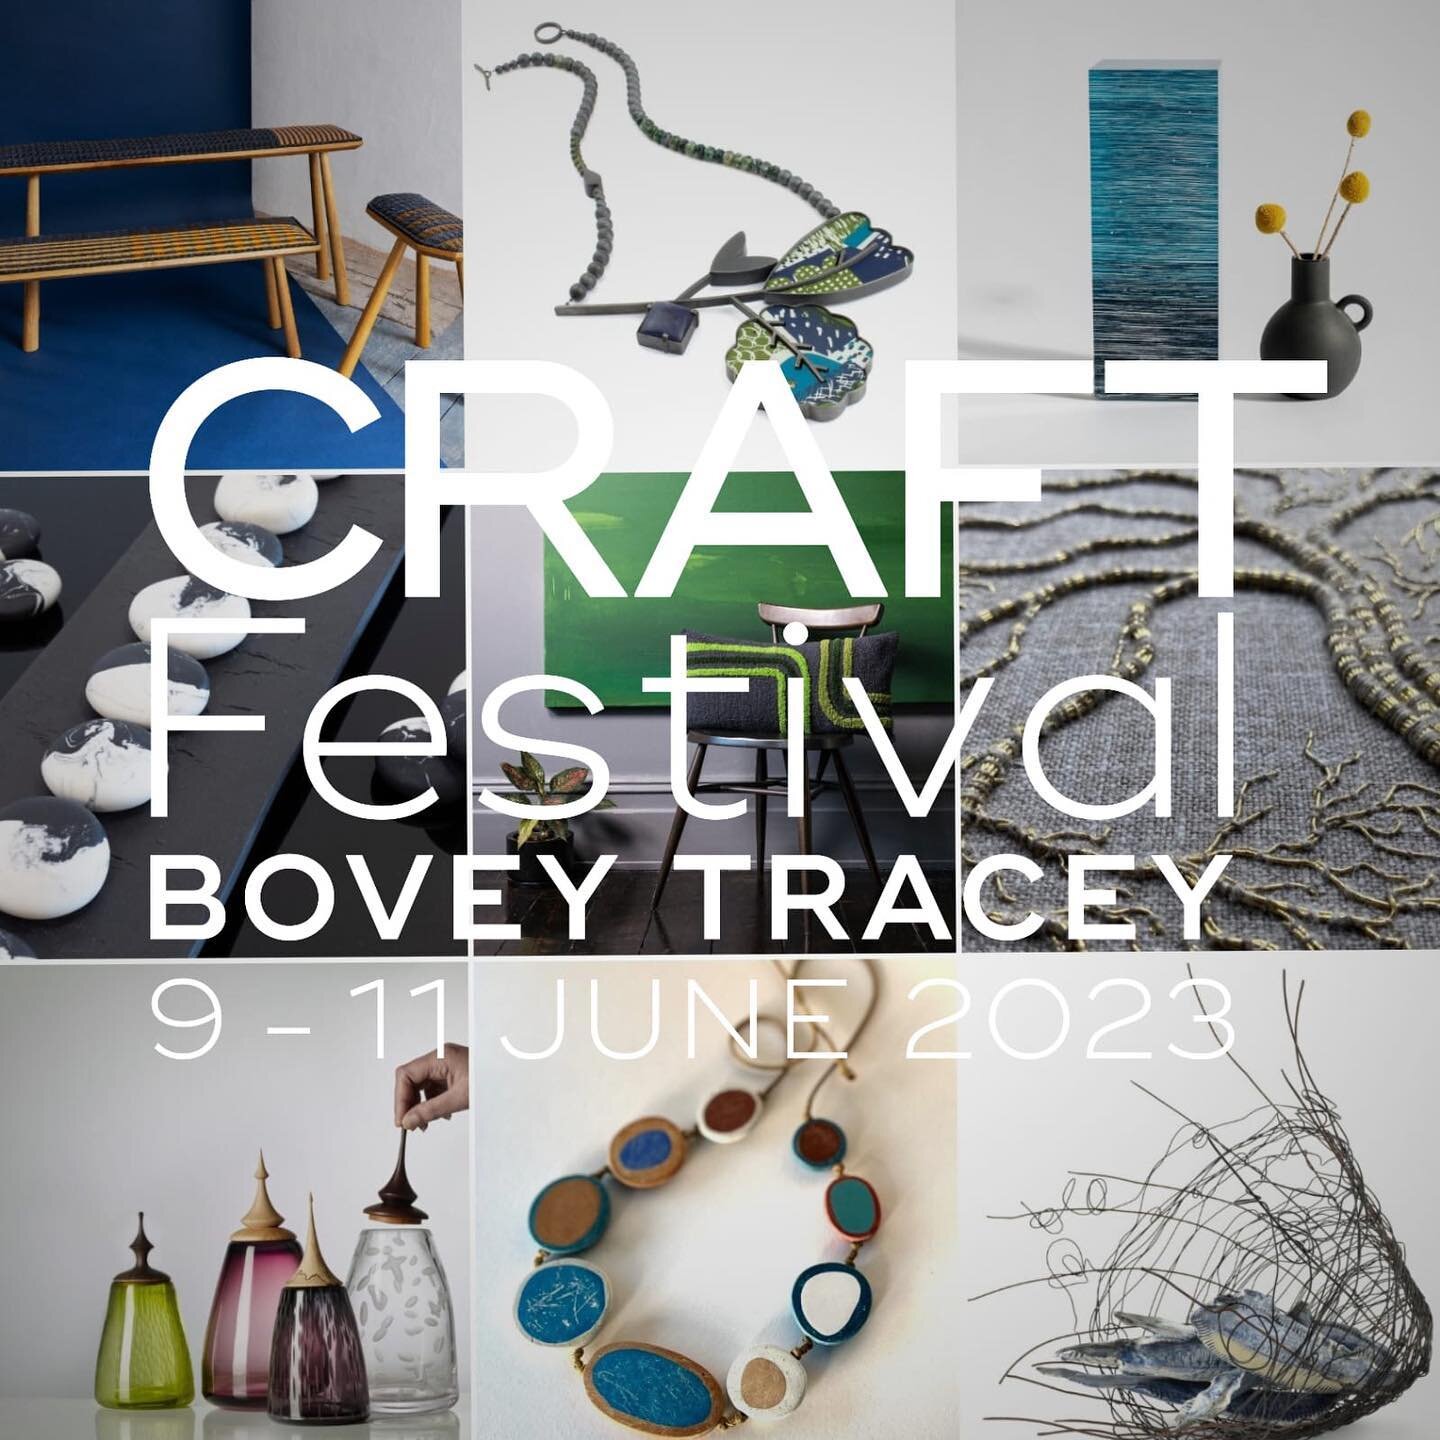 Something very special coming up next week - I&rsquo;m very excited share that I will be demonstrating my embroidery alongside a very talented line up of 
@design_nationuk as part of @craftfestival beginning of next month, 9-11 June at Bovey Tracey.
